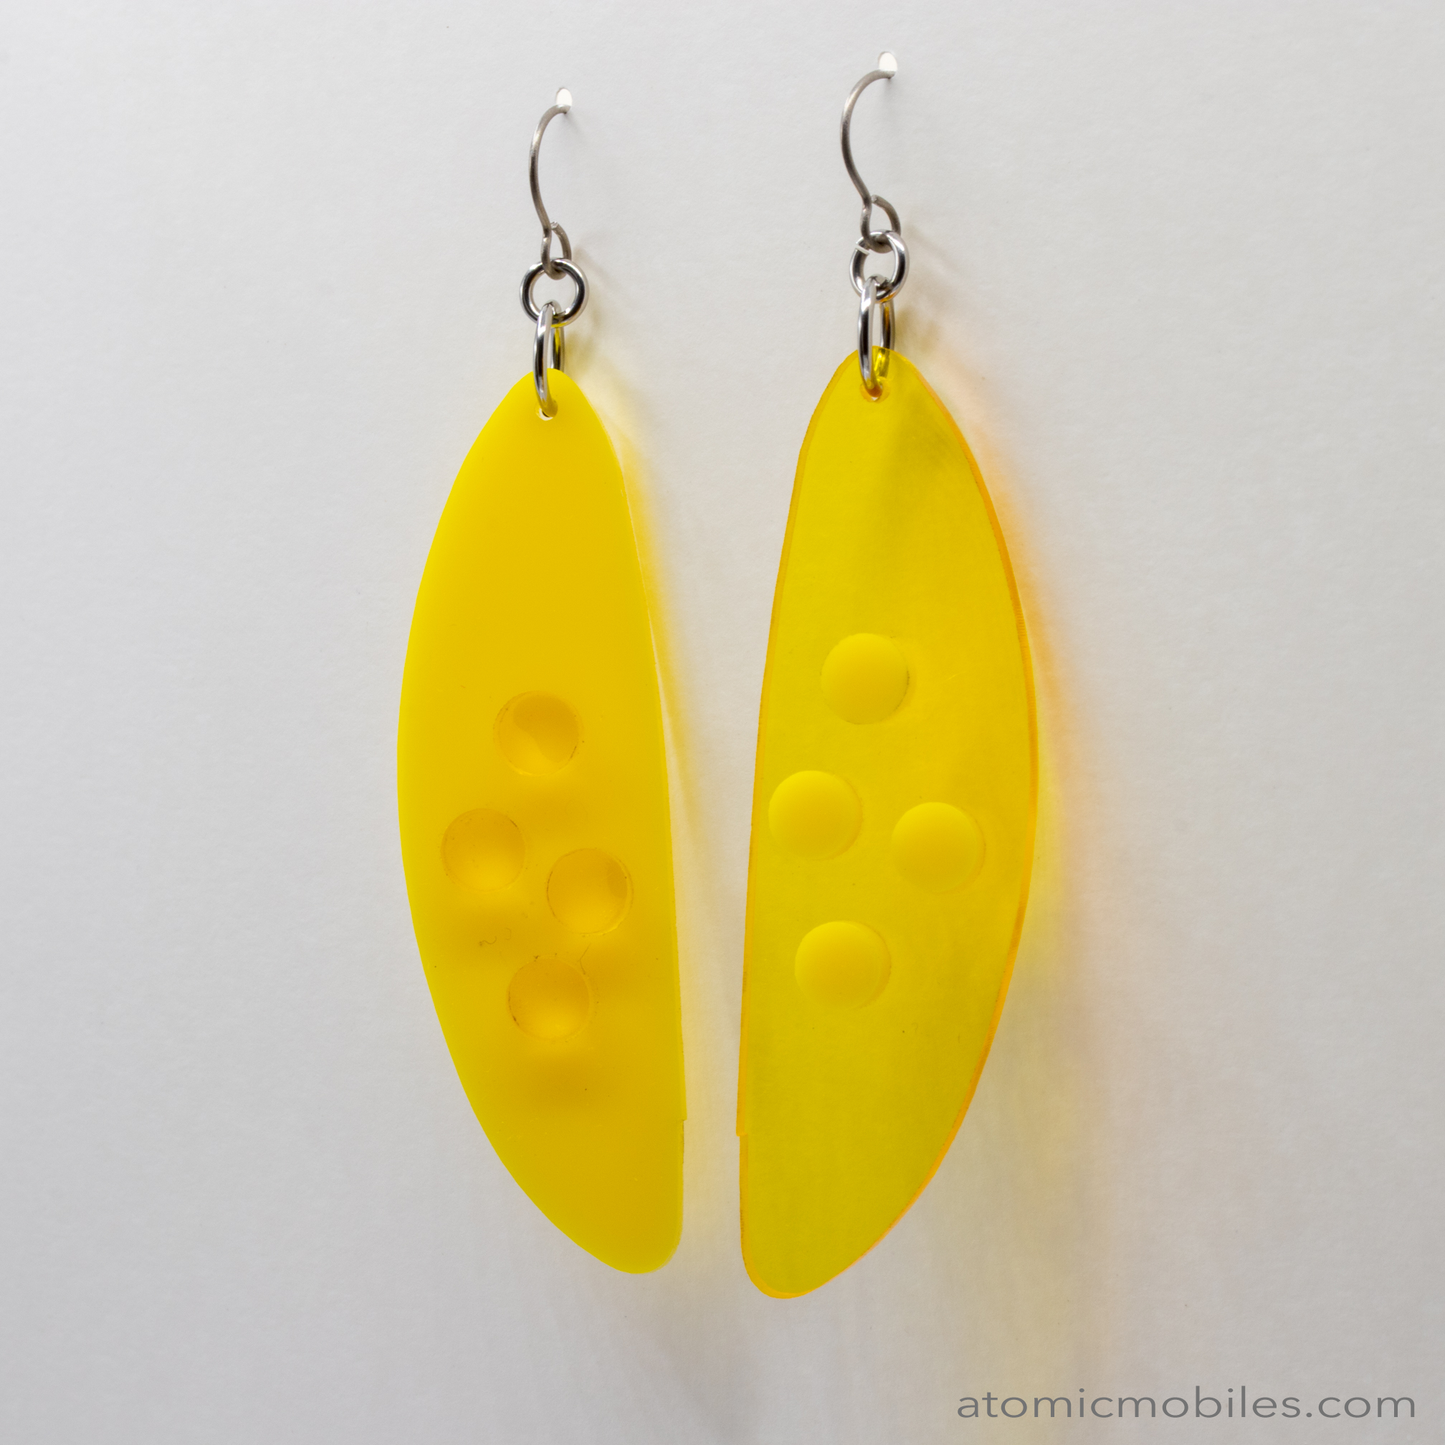 POPdots modern retro statement earrings in Yellow and Clear Yellow acrylic by AtomicMobiles.com